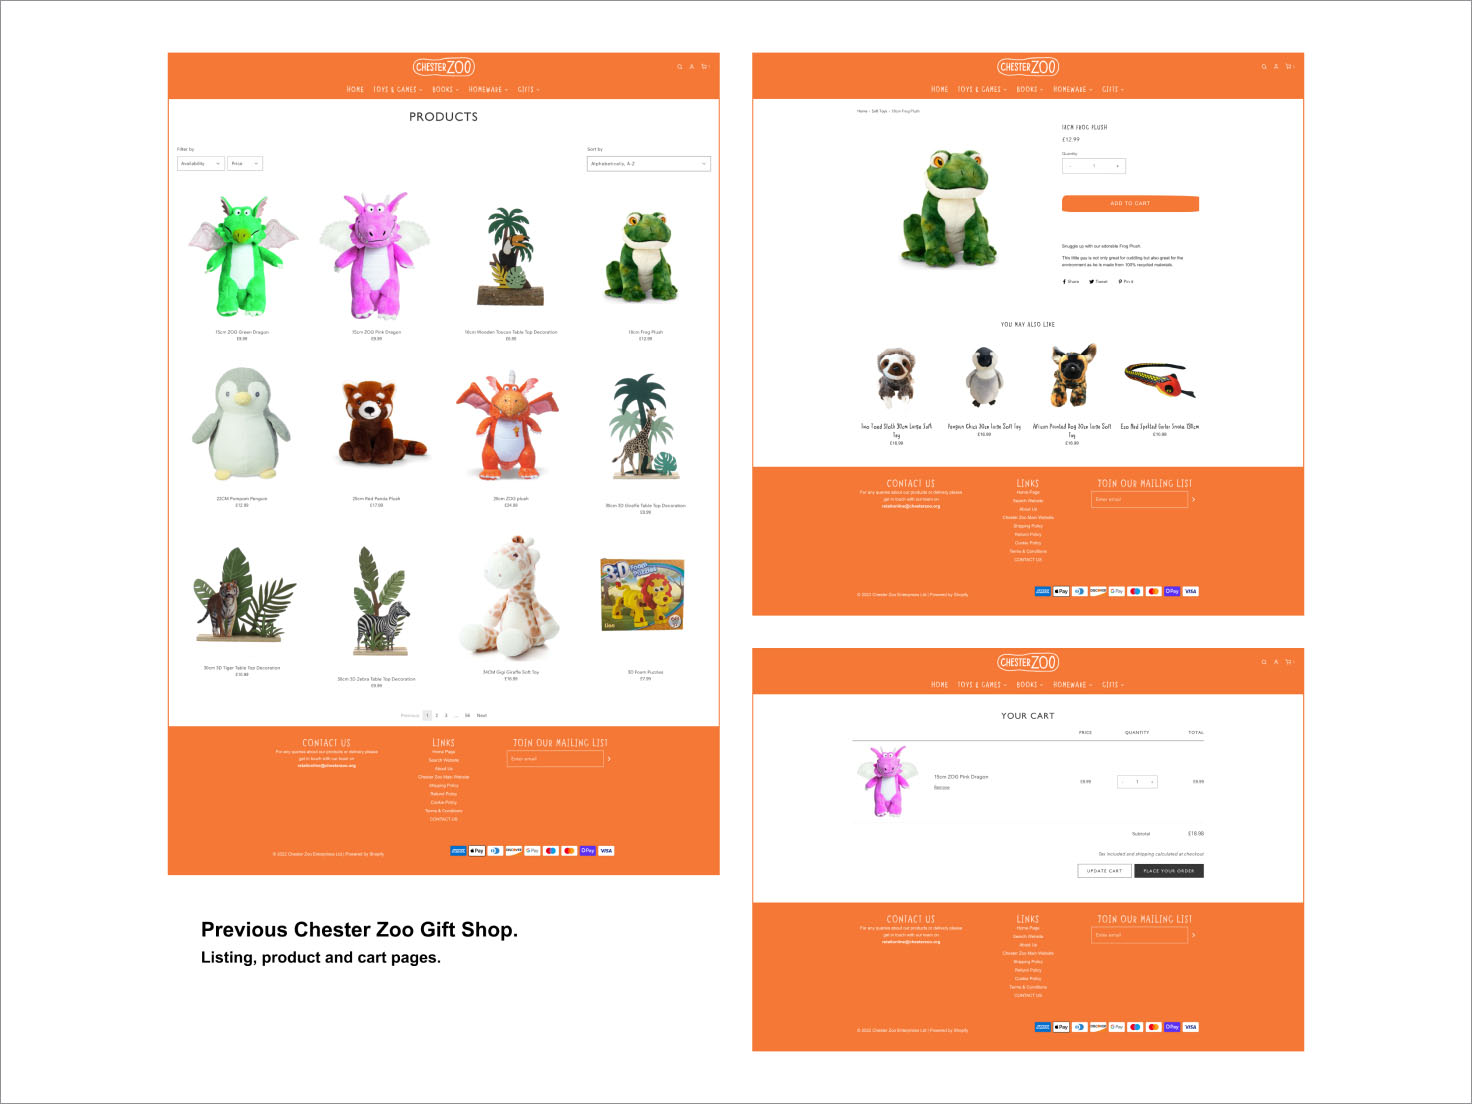 Previous Chester Zoo Gift Shop Shopify web designer review of listing, product and cart pages. 